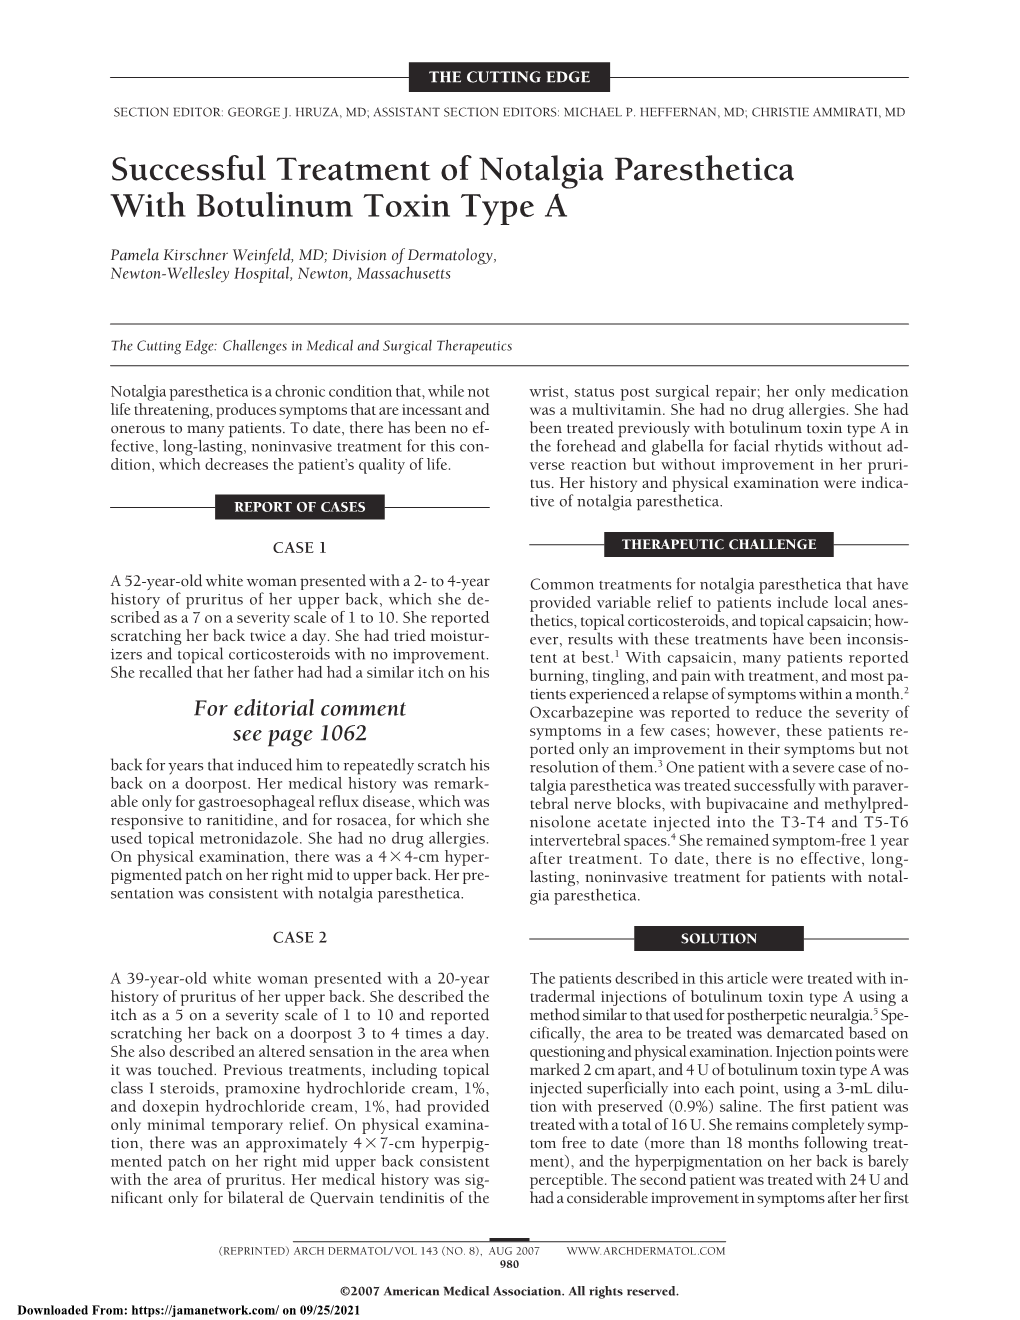 Successful Treatment of Notalgia Paresthetica with Botulinum Toxin Type A